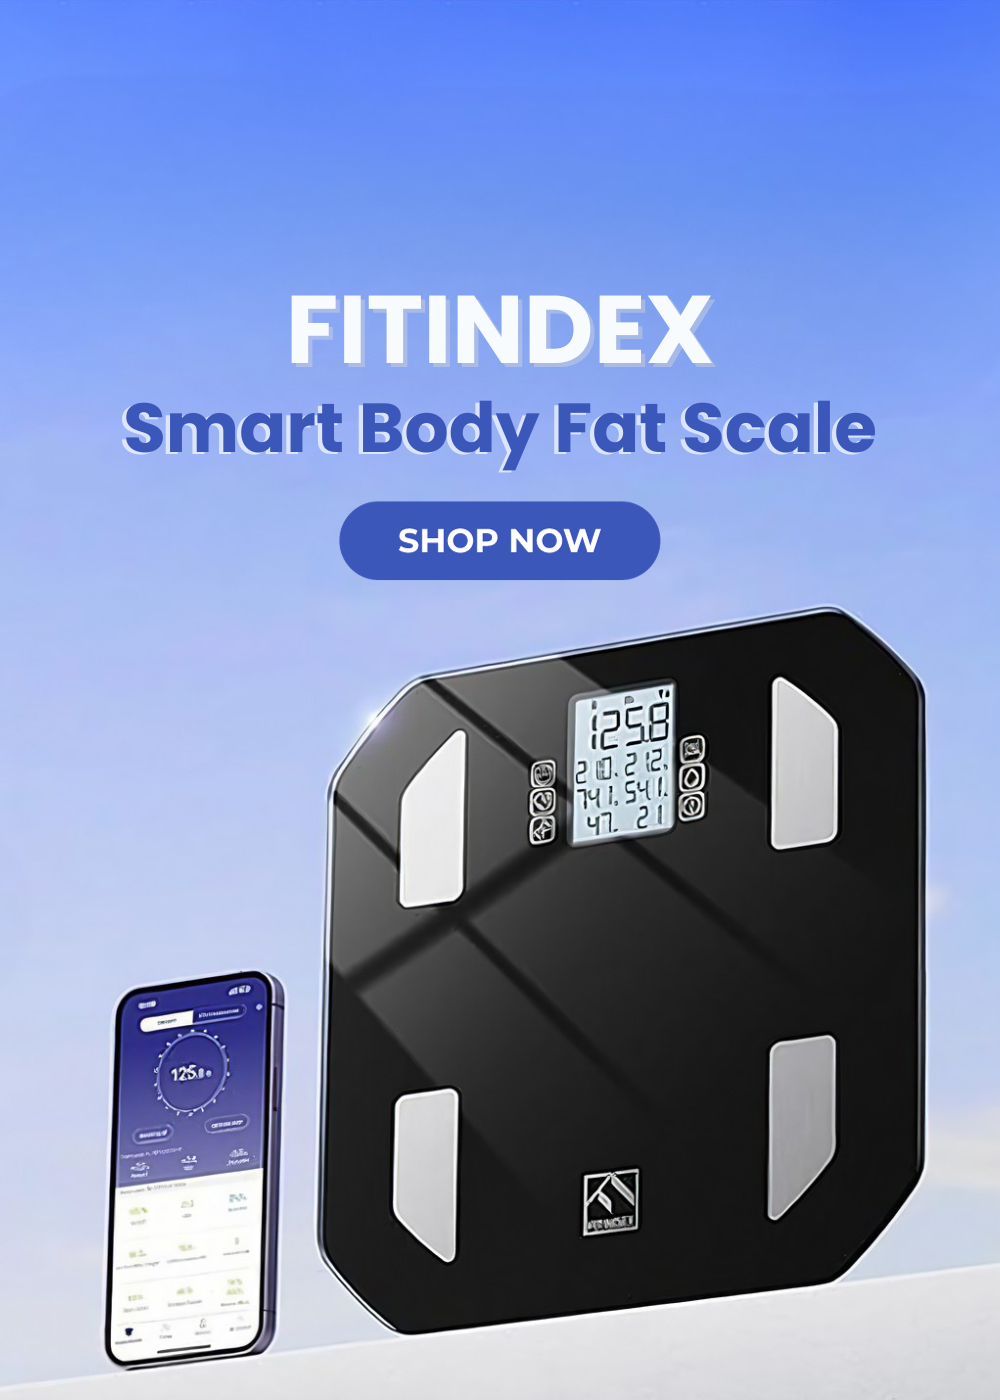 FITINDEX Smart Scale for Body Weight, Digital Bathroom Scale for